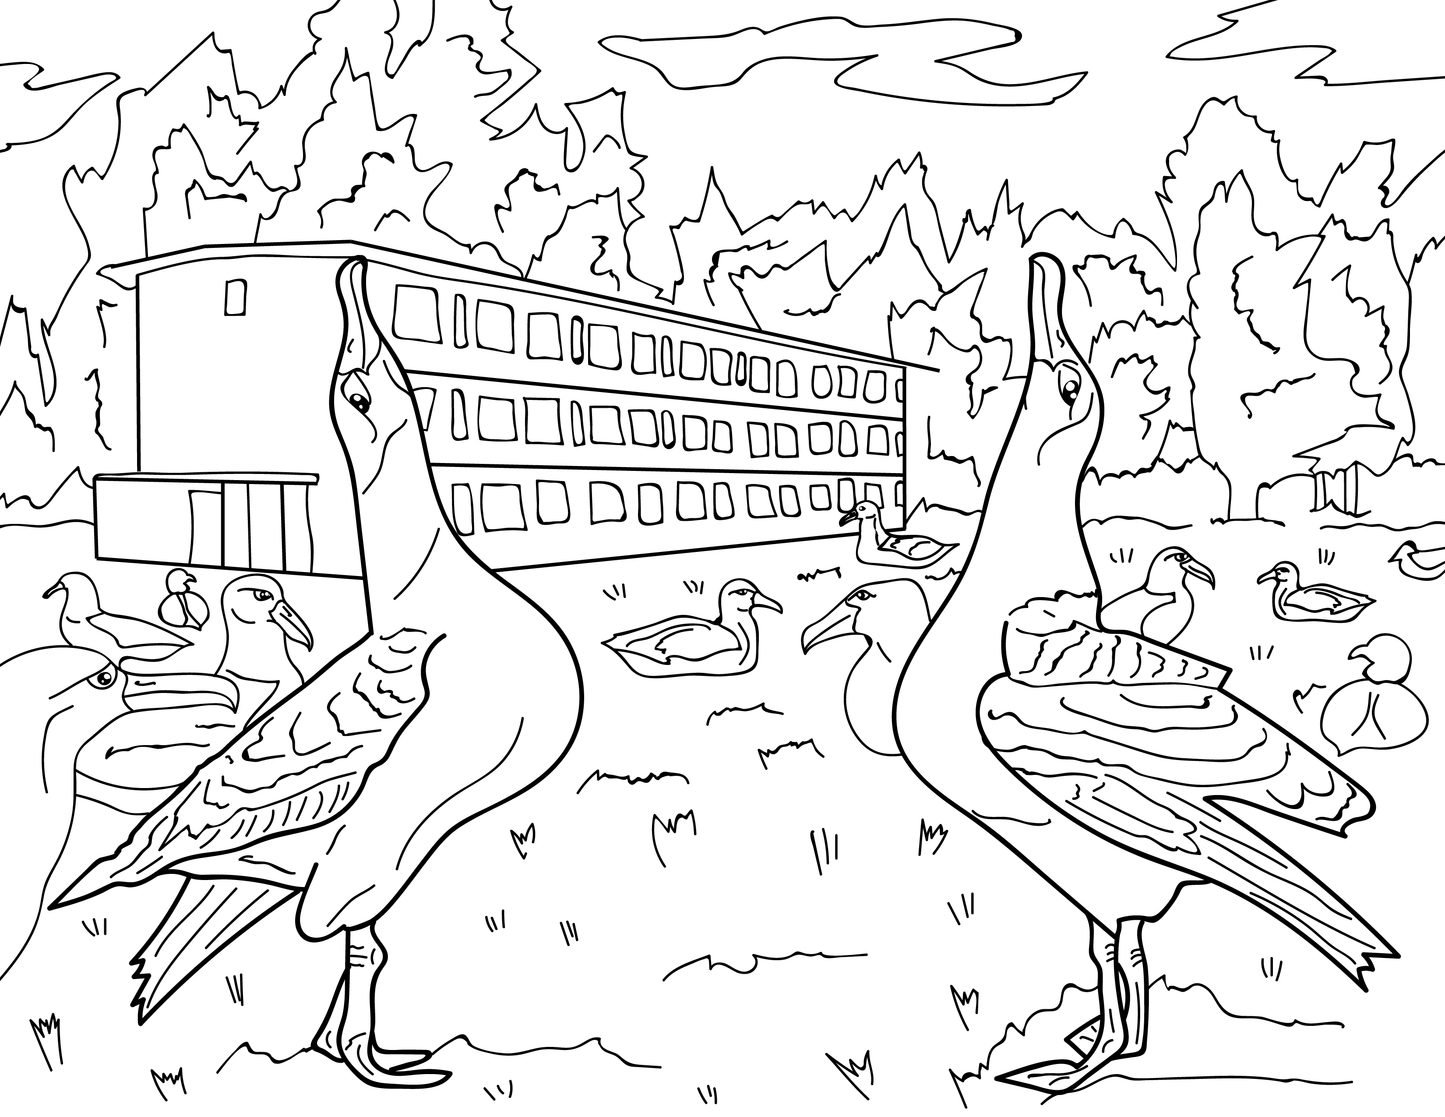 Midway Atoll Educational Coloring Book